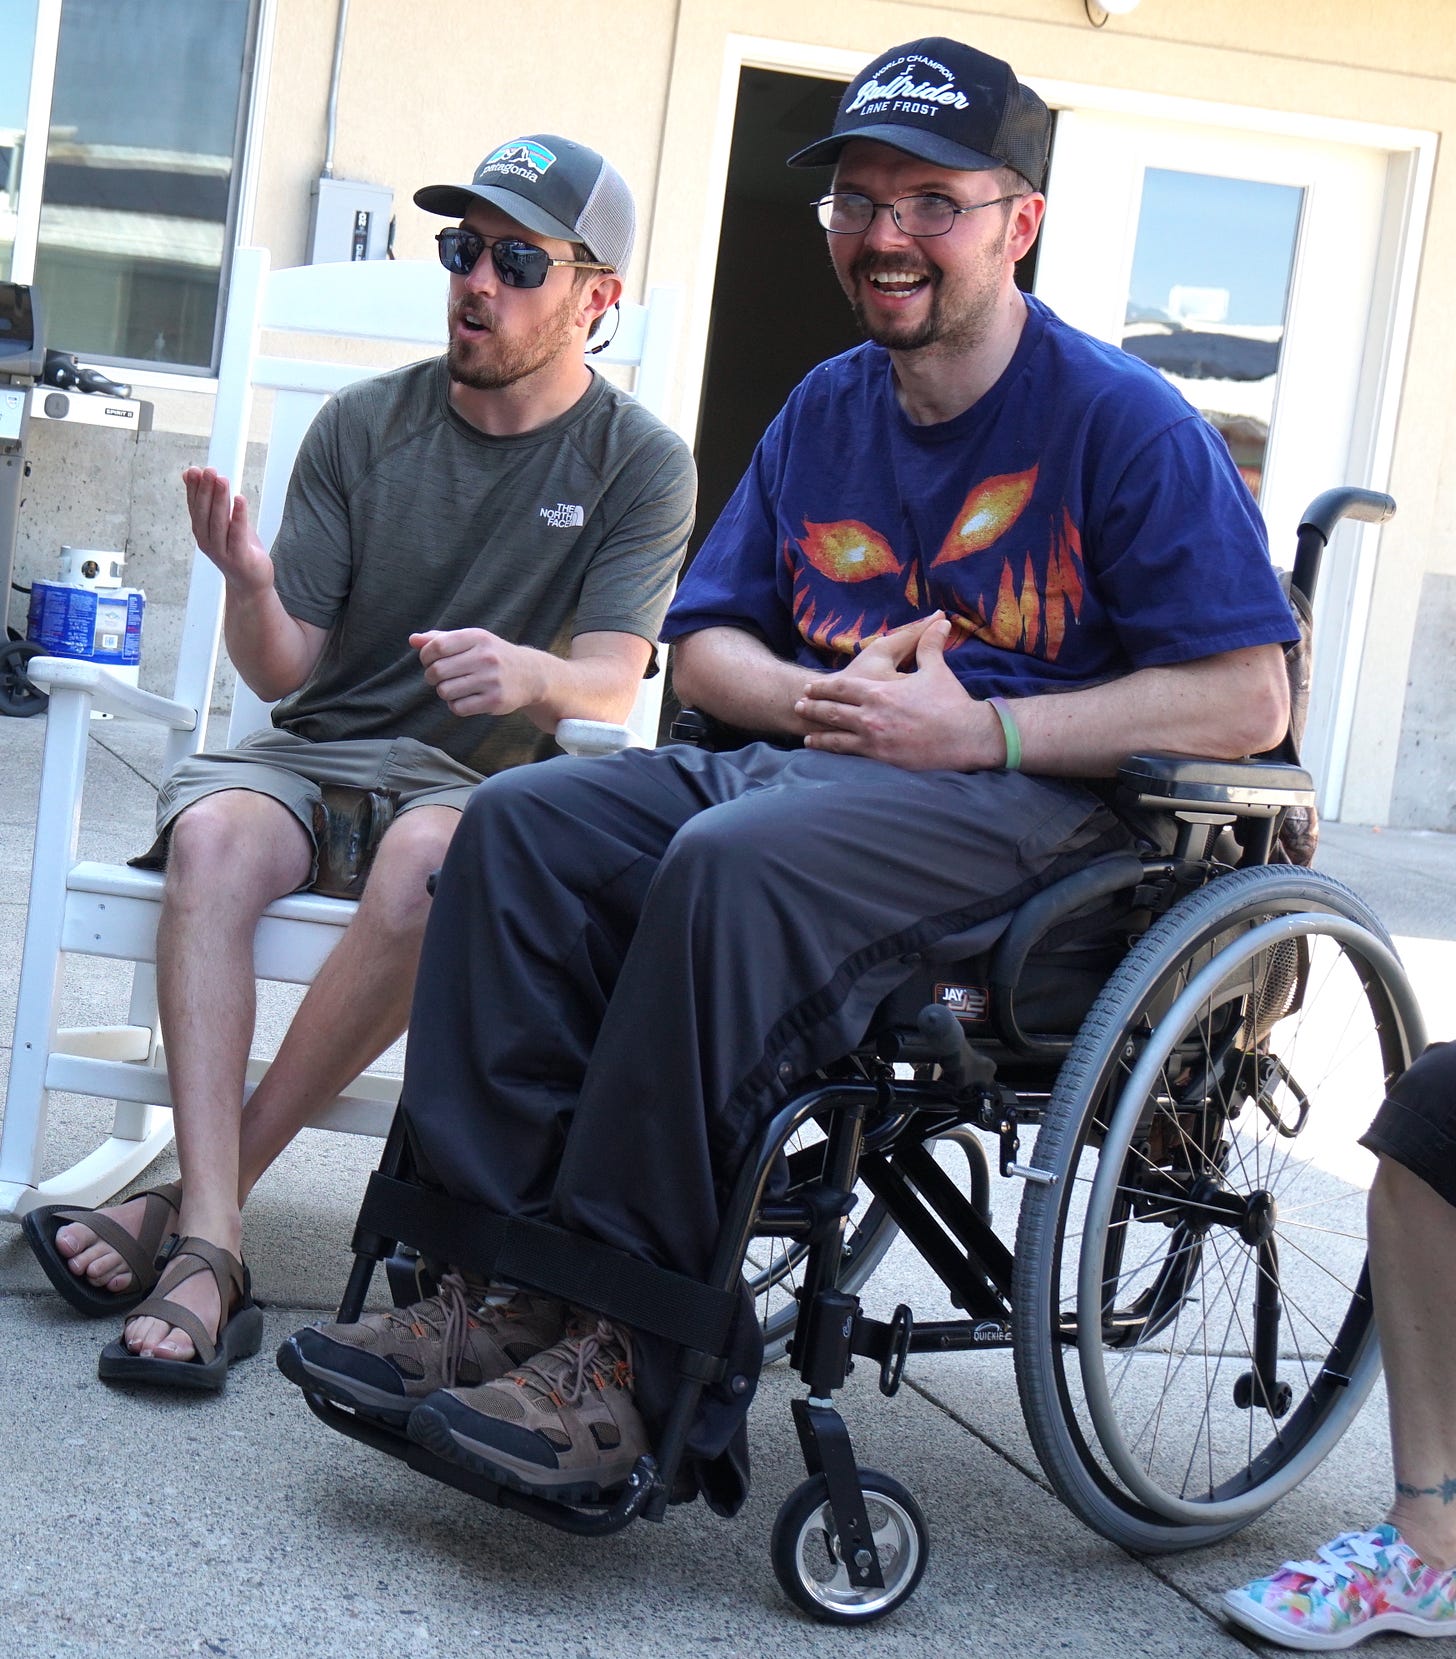 A man in a wheelchair with a goatee wearing a purple t-shirt, navy blue baseball cap and glasses smiles as another man with short facial hair sitting to his right wearing a gray t-shirt, cap and sunglasses gesticulates as he speaks to people outside the frame of the photo.